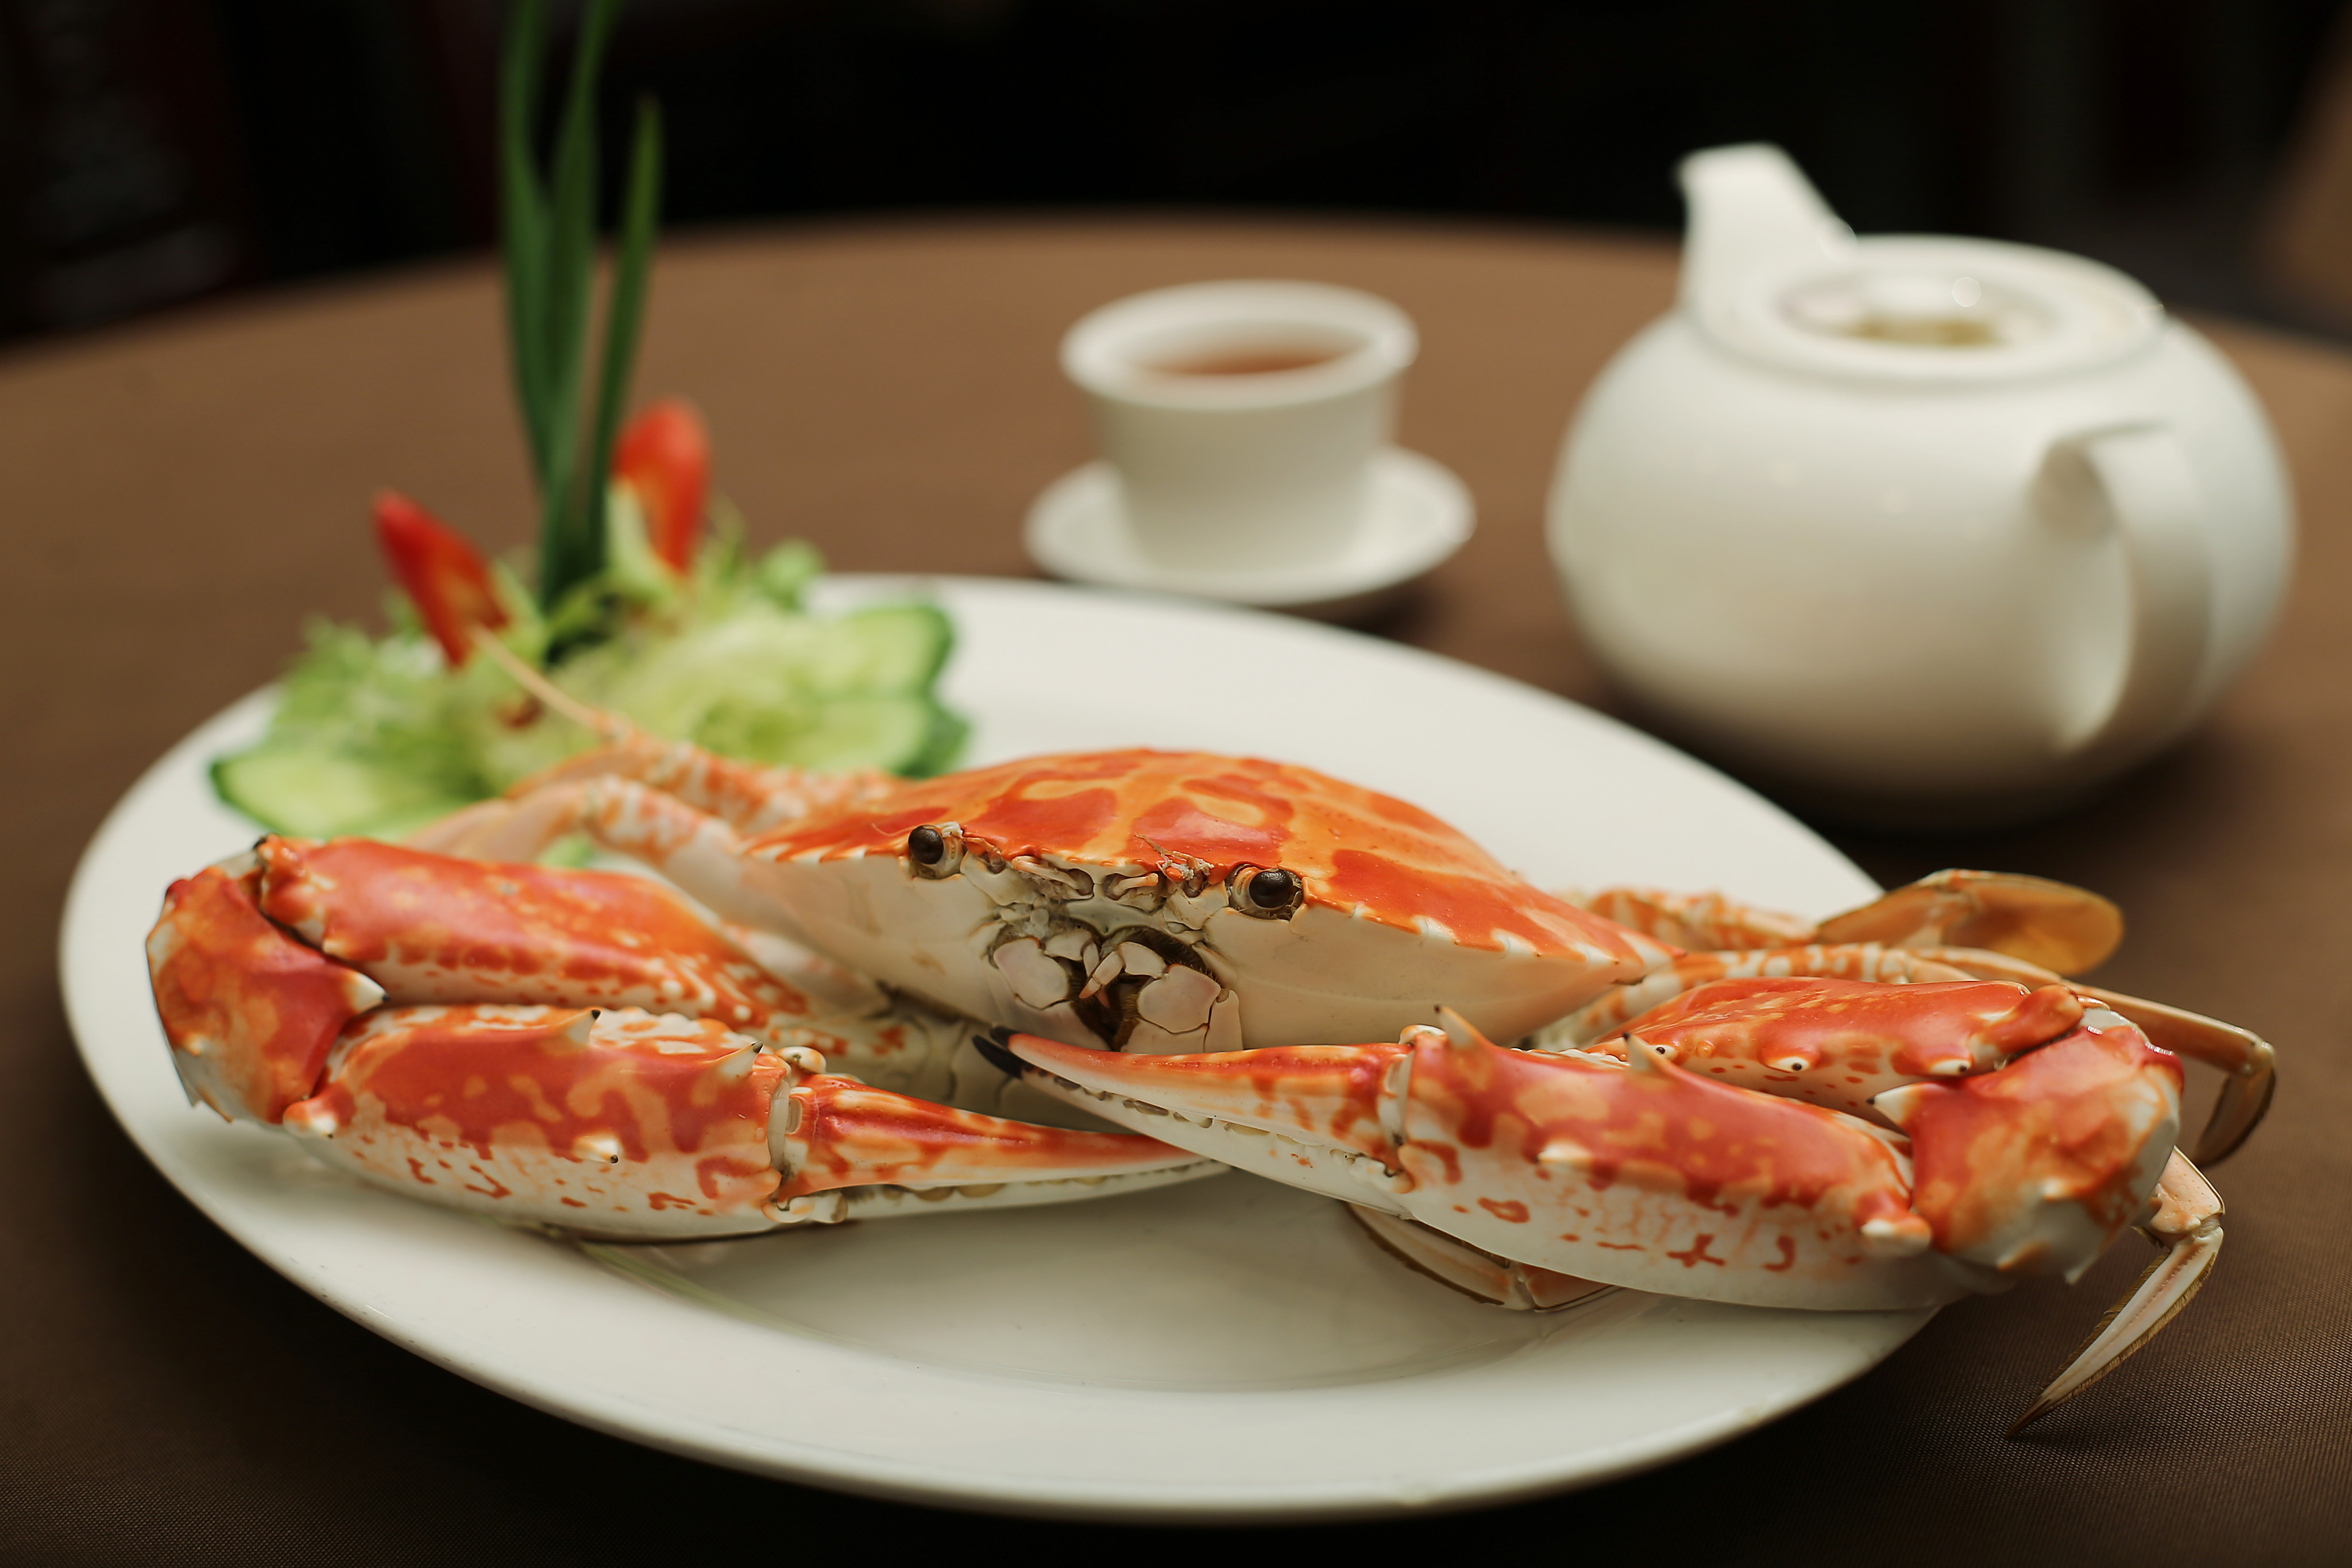 Chilled Chiu Chow crab at Hong Kong restaurant Pak Loh Chiu Chow. Interior designer Ed Ng, who spends part of the year in Japan, shares where he enjoys authentic Chinese food when he returns home, and offers dining tips for visitors to Karuizawa, Japan. Photo: Dickson Lee